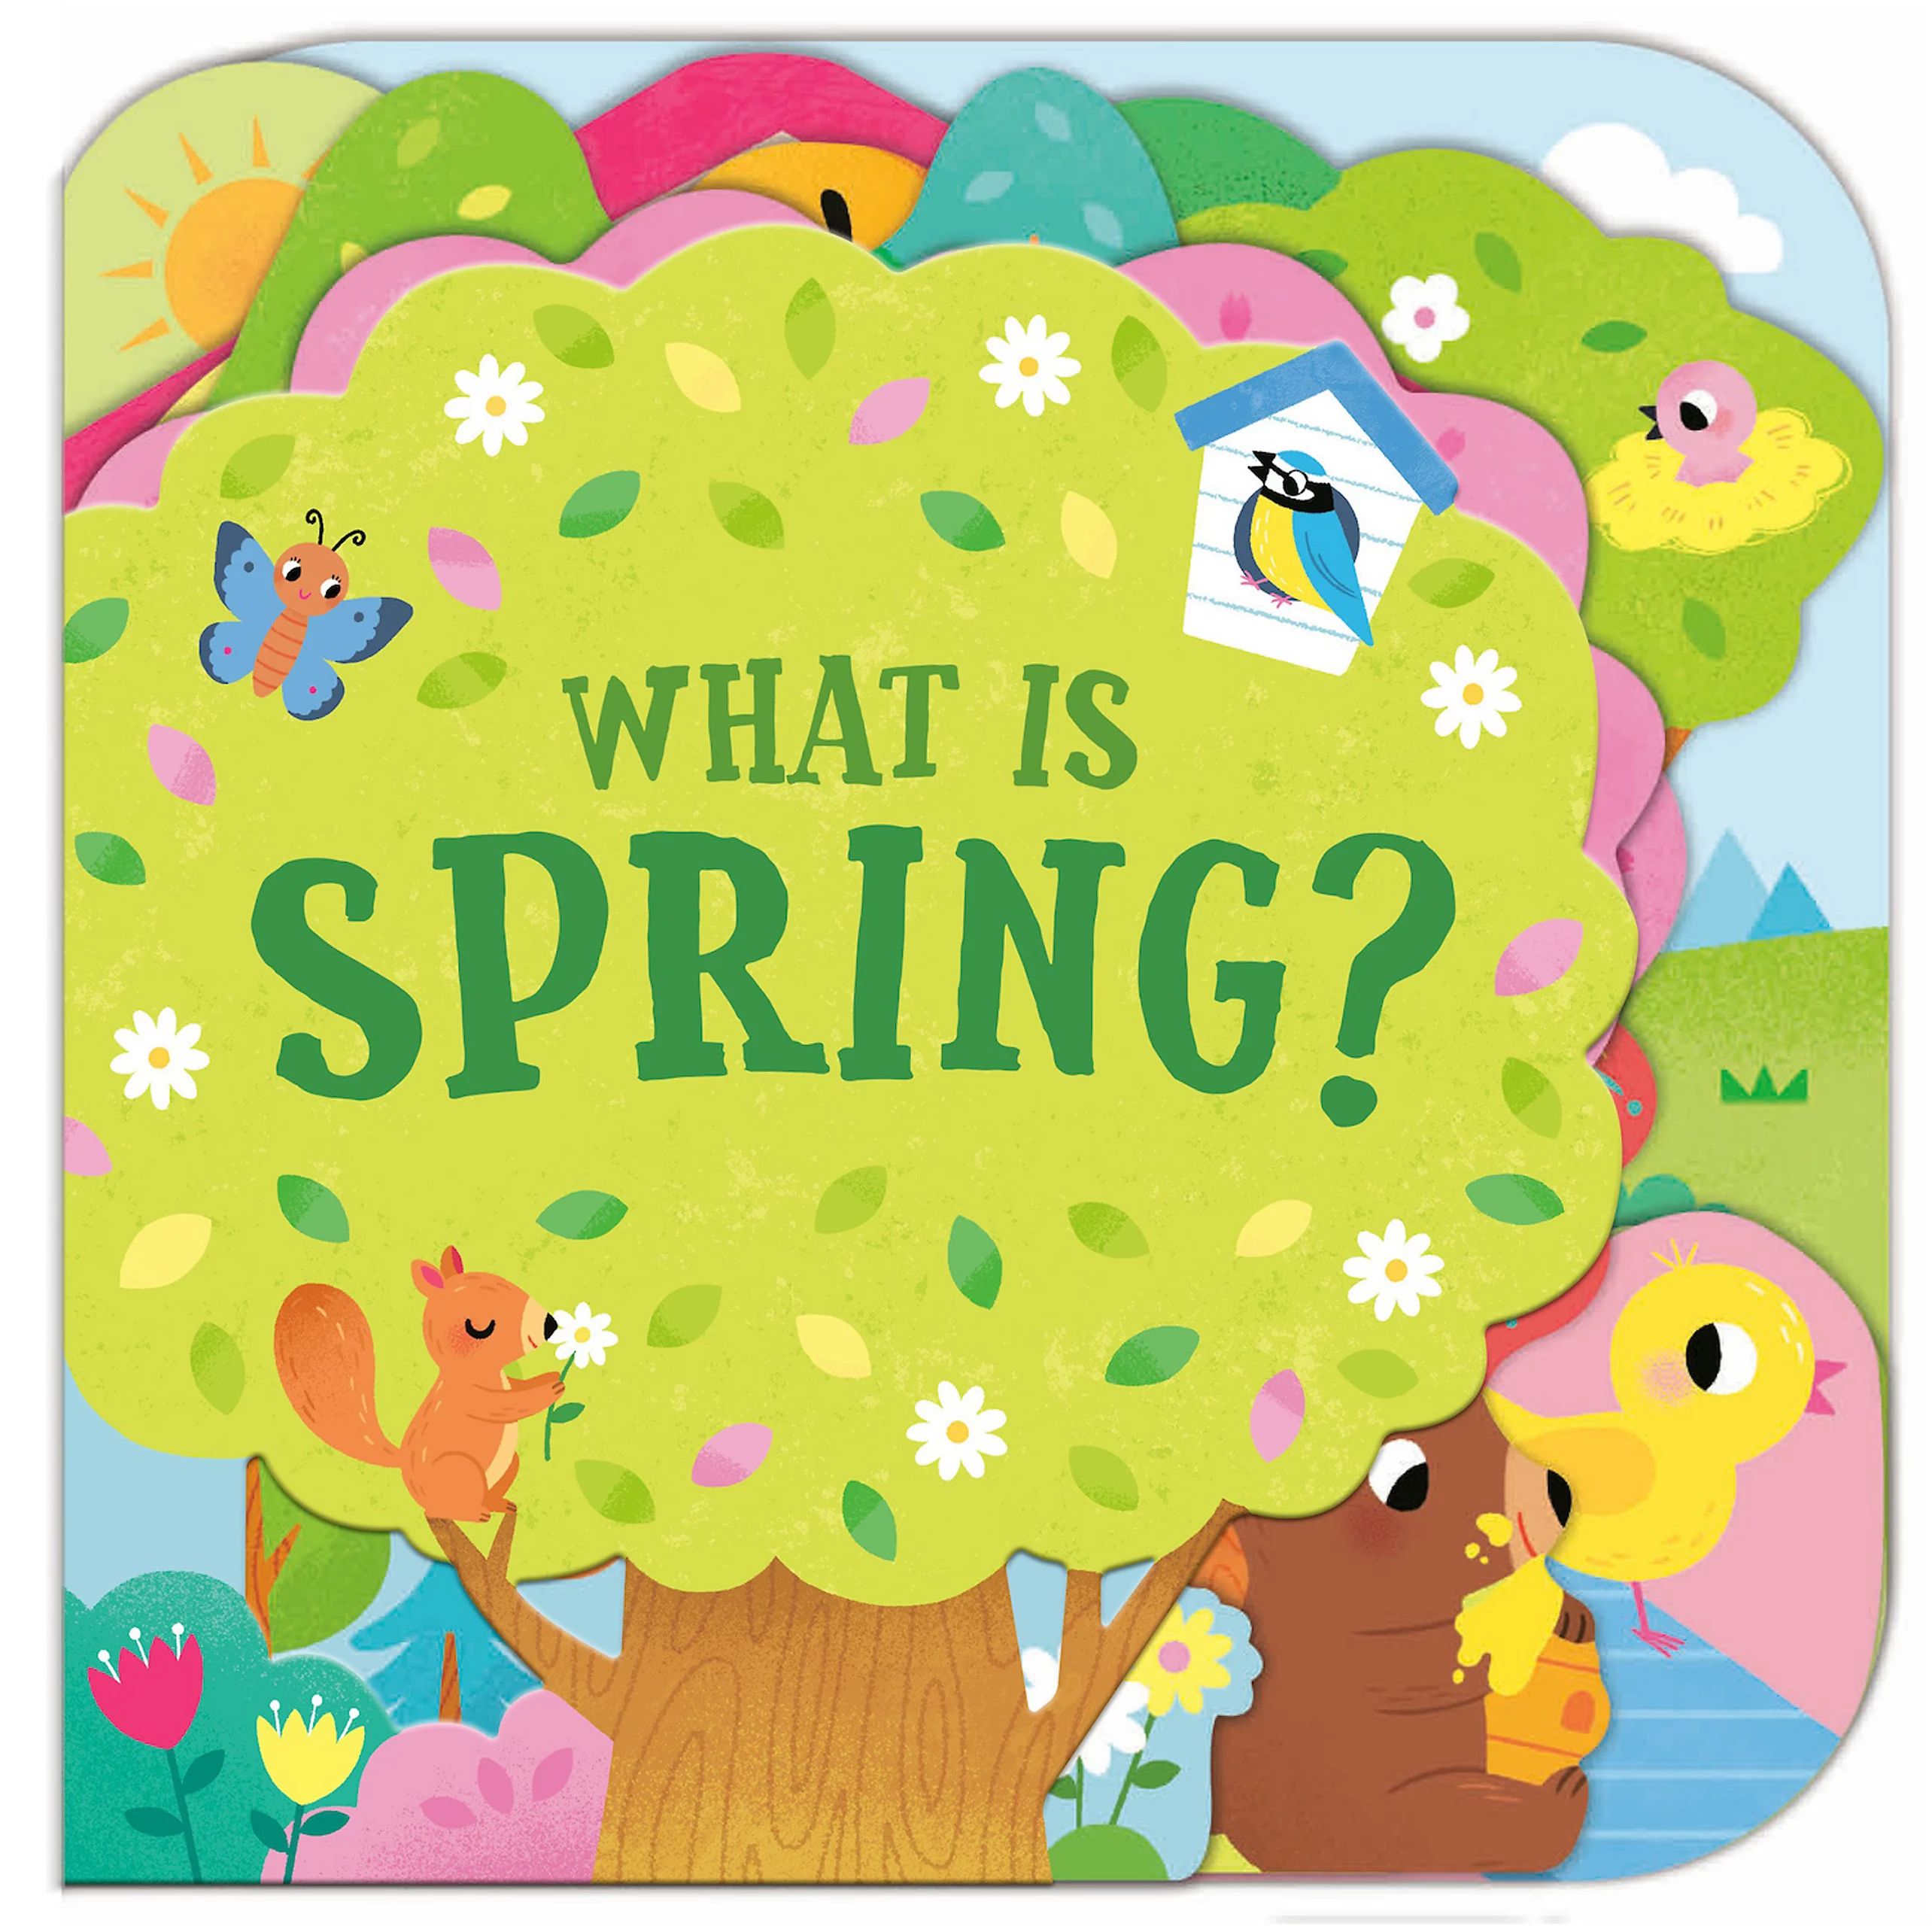 What Is Spring? by Sonali Fry Children's Book | Kohl's